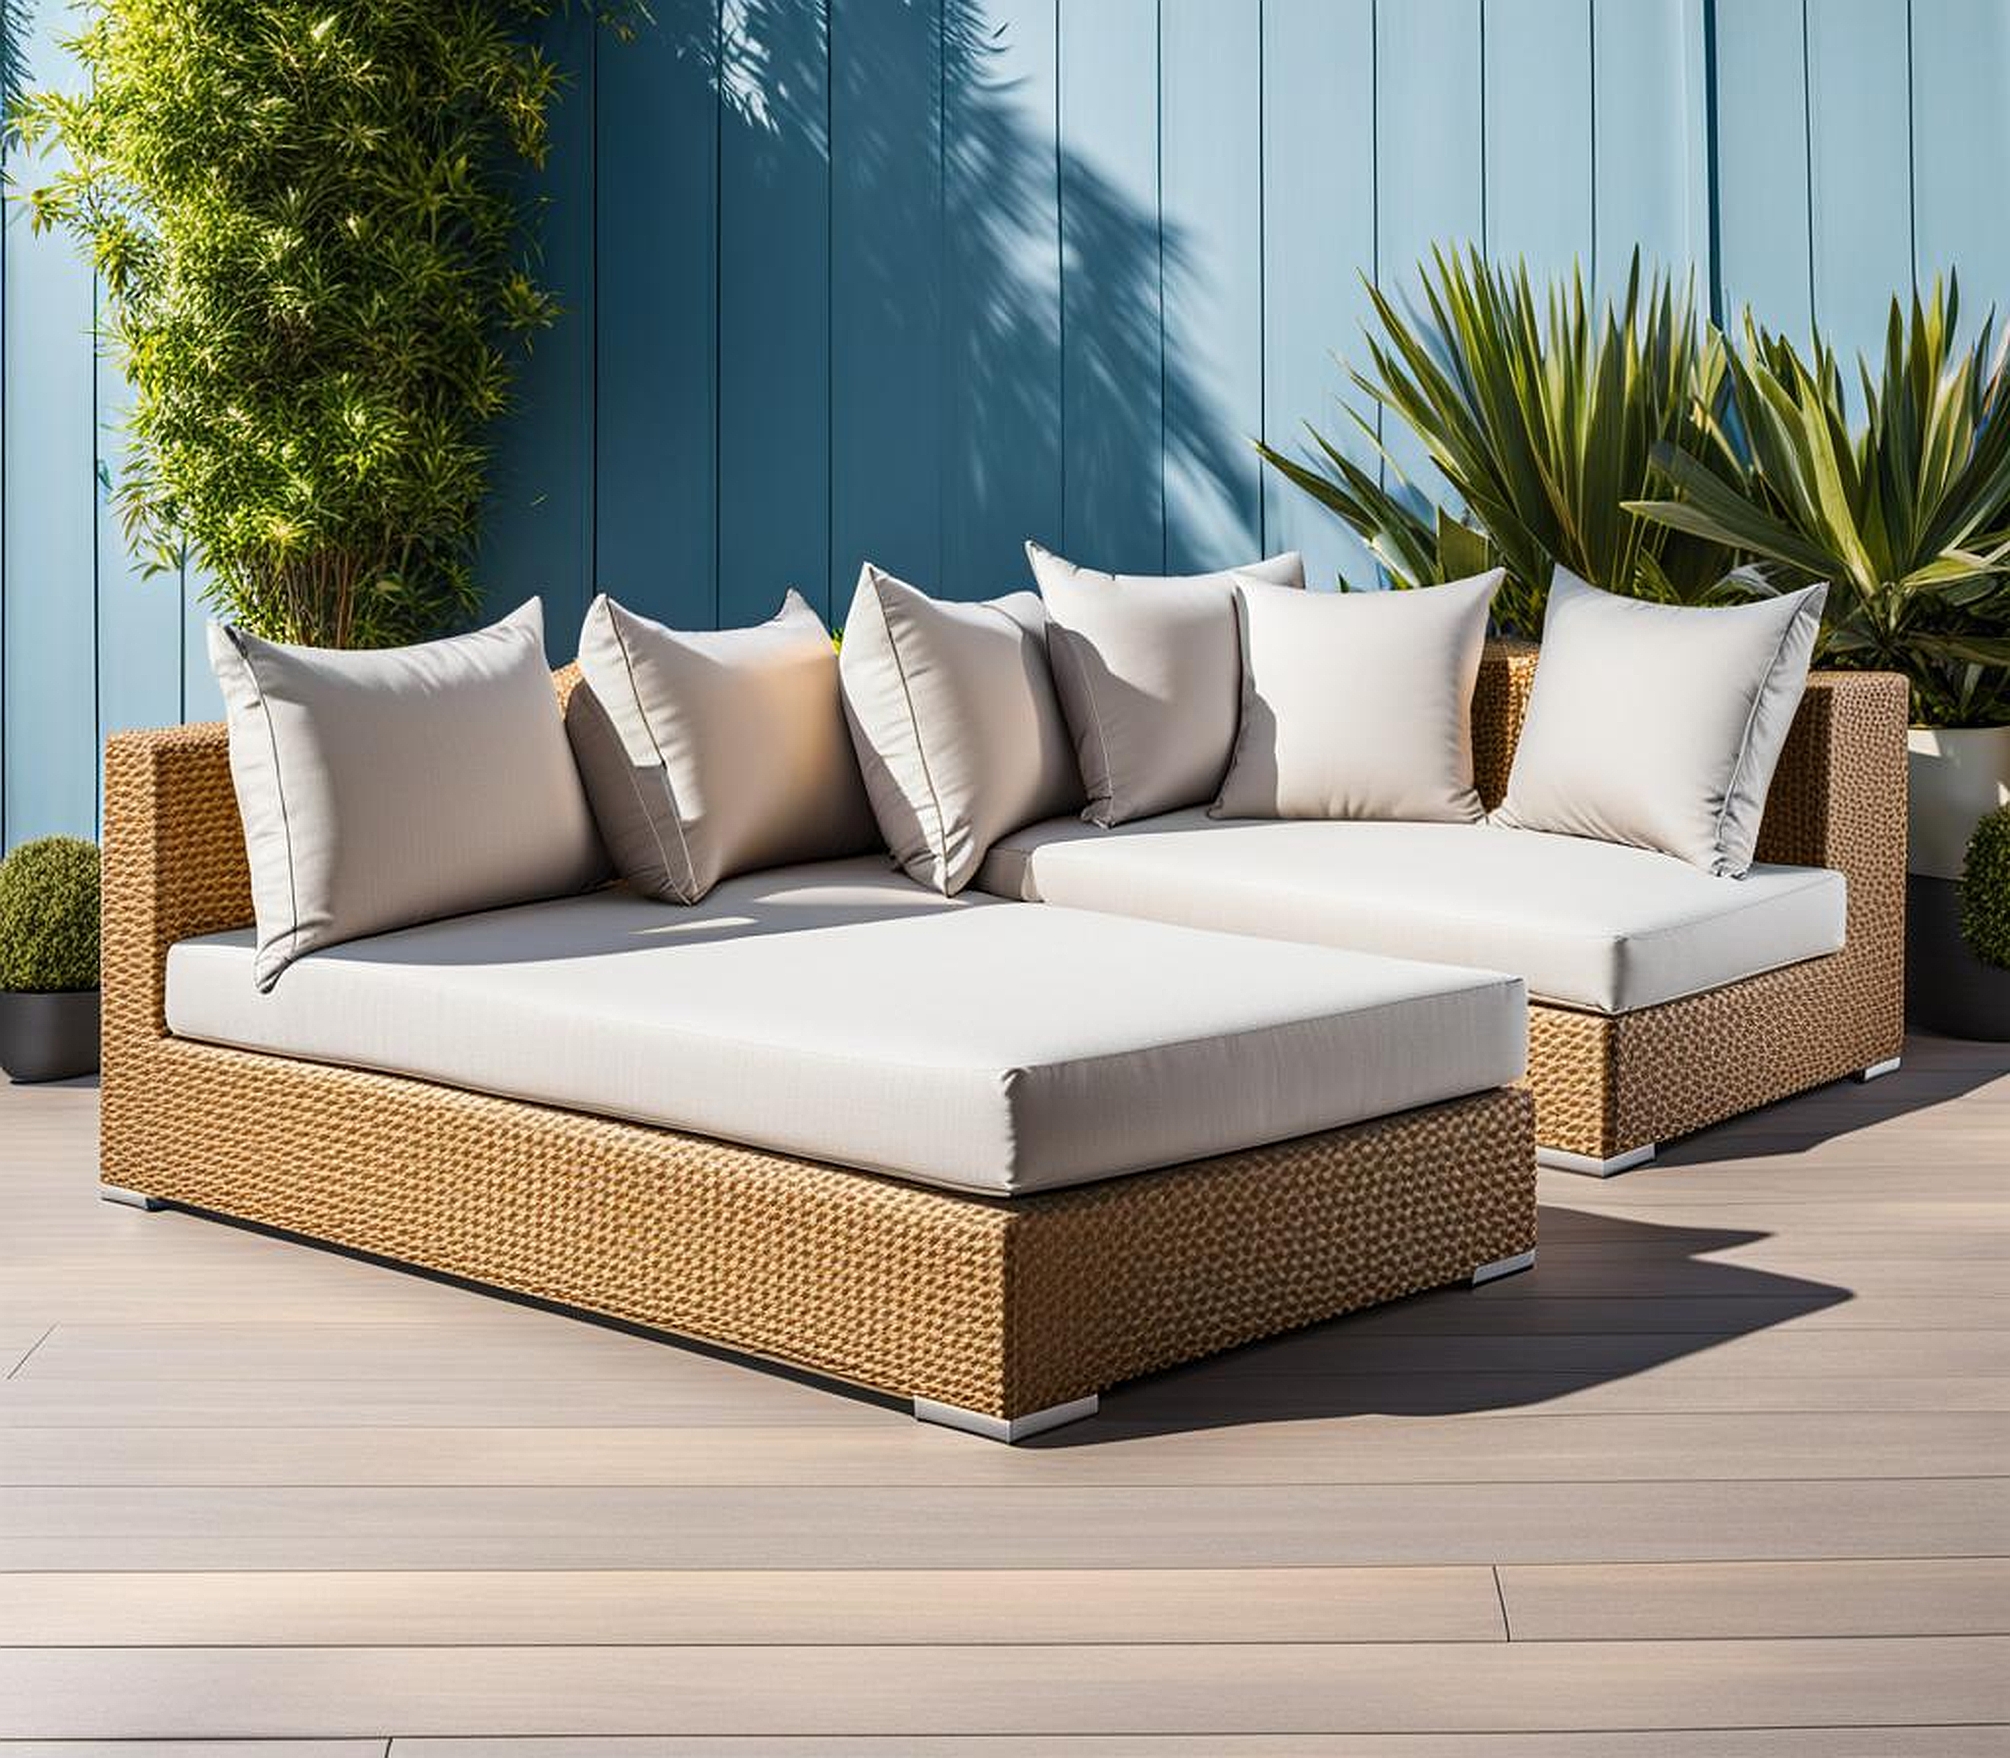 The Ultimate Guide to Outdoor Cushion Sizes Including 25 Inches